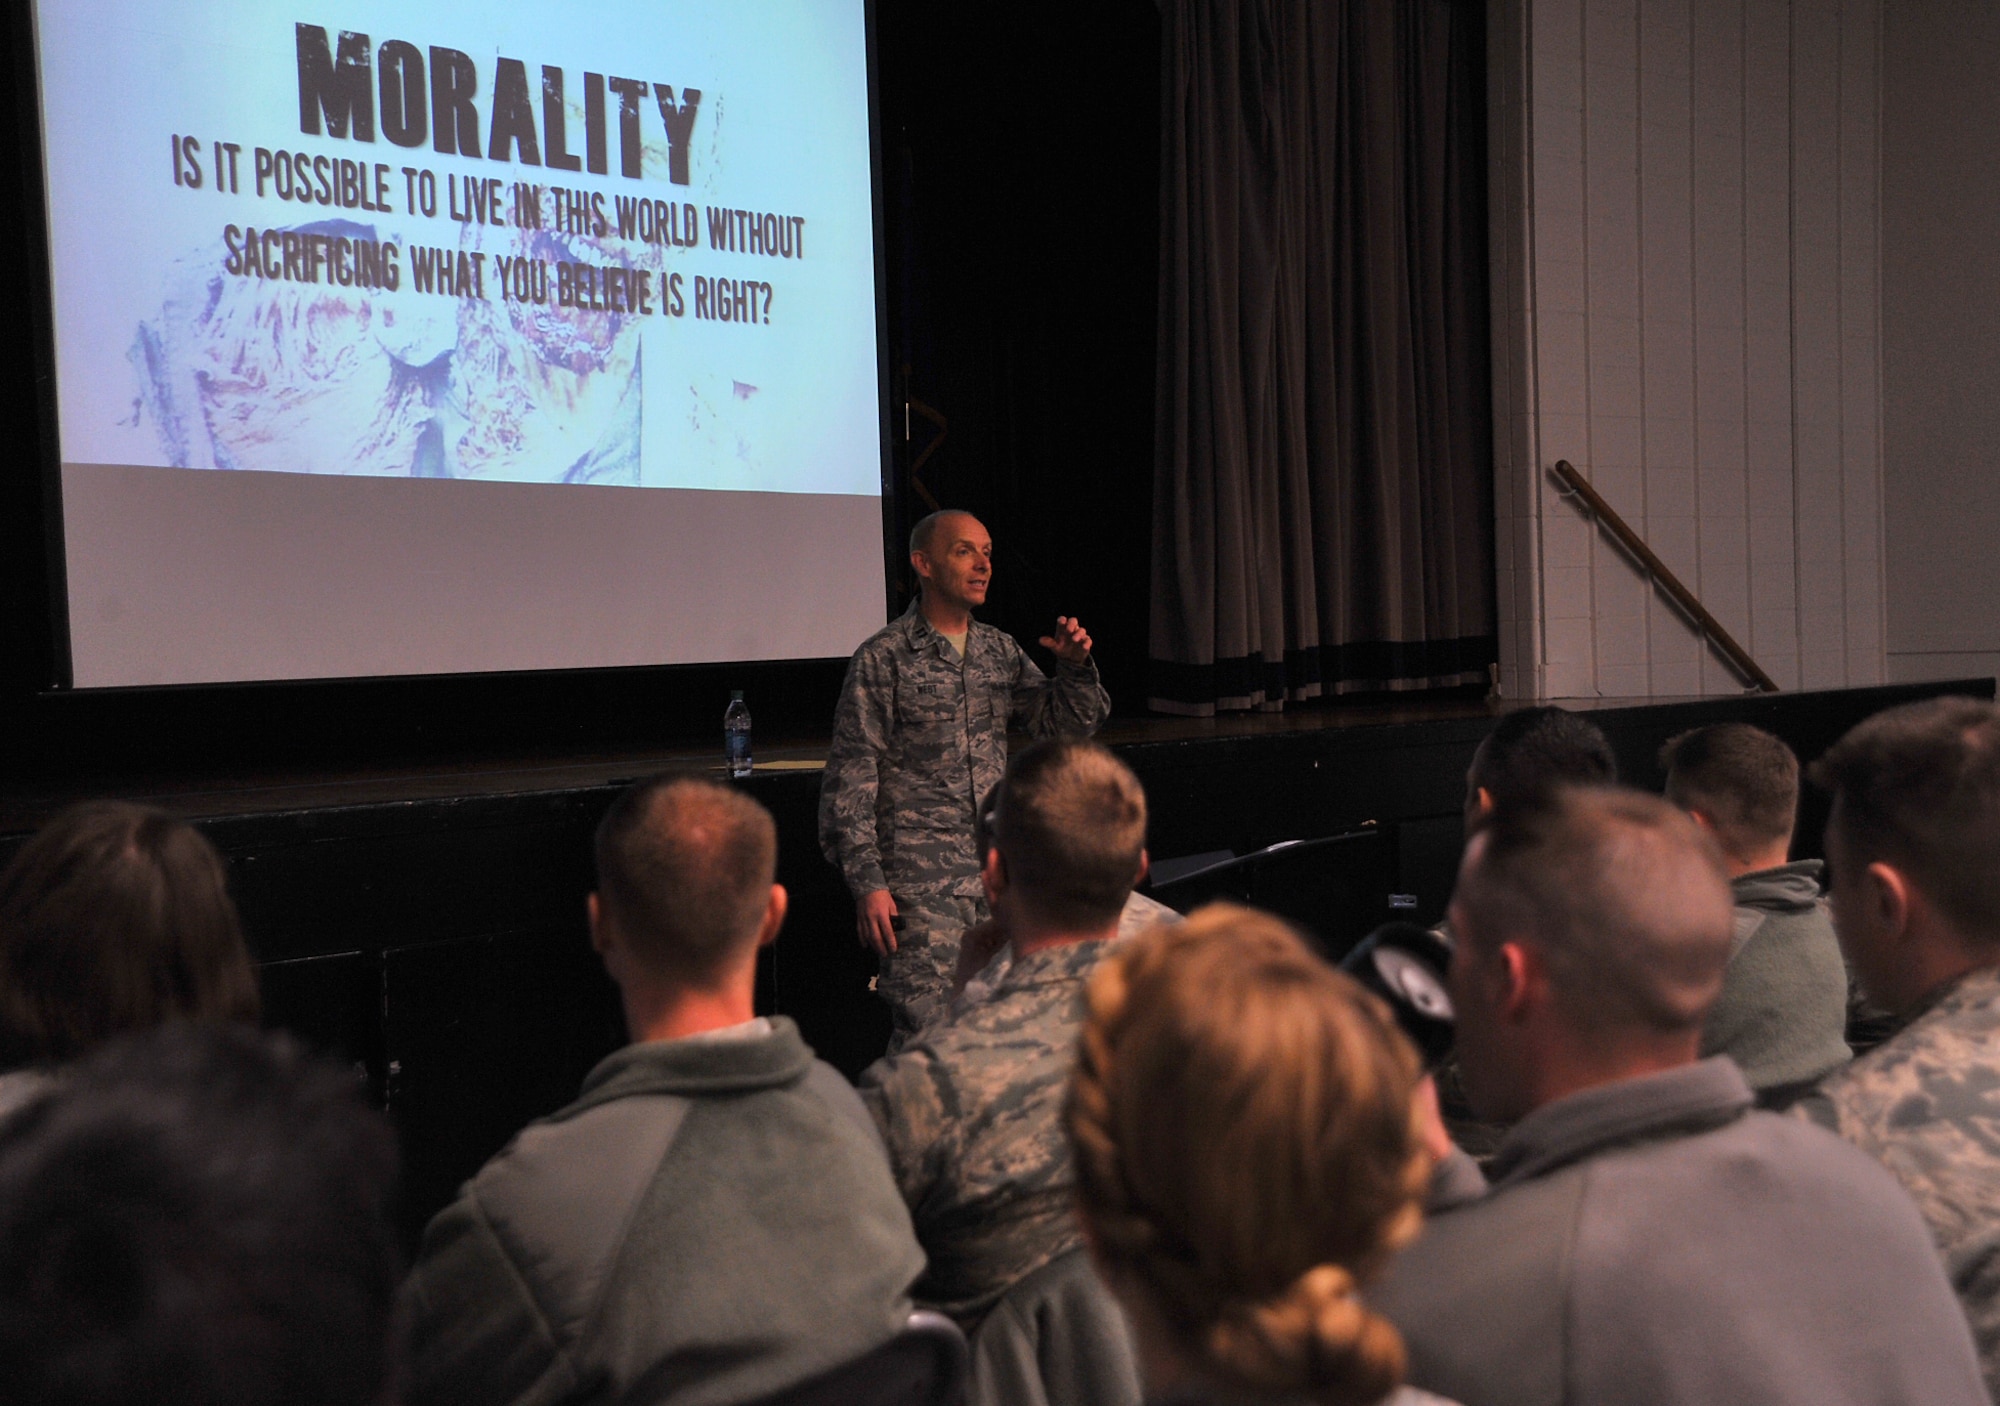 Chaplain (Capt.) Thomas West, 319th Air Base Wing chaplain, leads the “Walking with the Dead” seminar during Spiritual Wingman Day on Grand Forks Air Force Base, North Dakota, Dec. 10, 2015. During the seminar, West used zombies to discuss the topics of morality, mortality and humanity. (U.S. Air Force photo by Senior Airman Grantham/released)